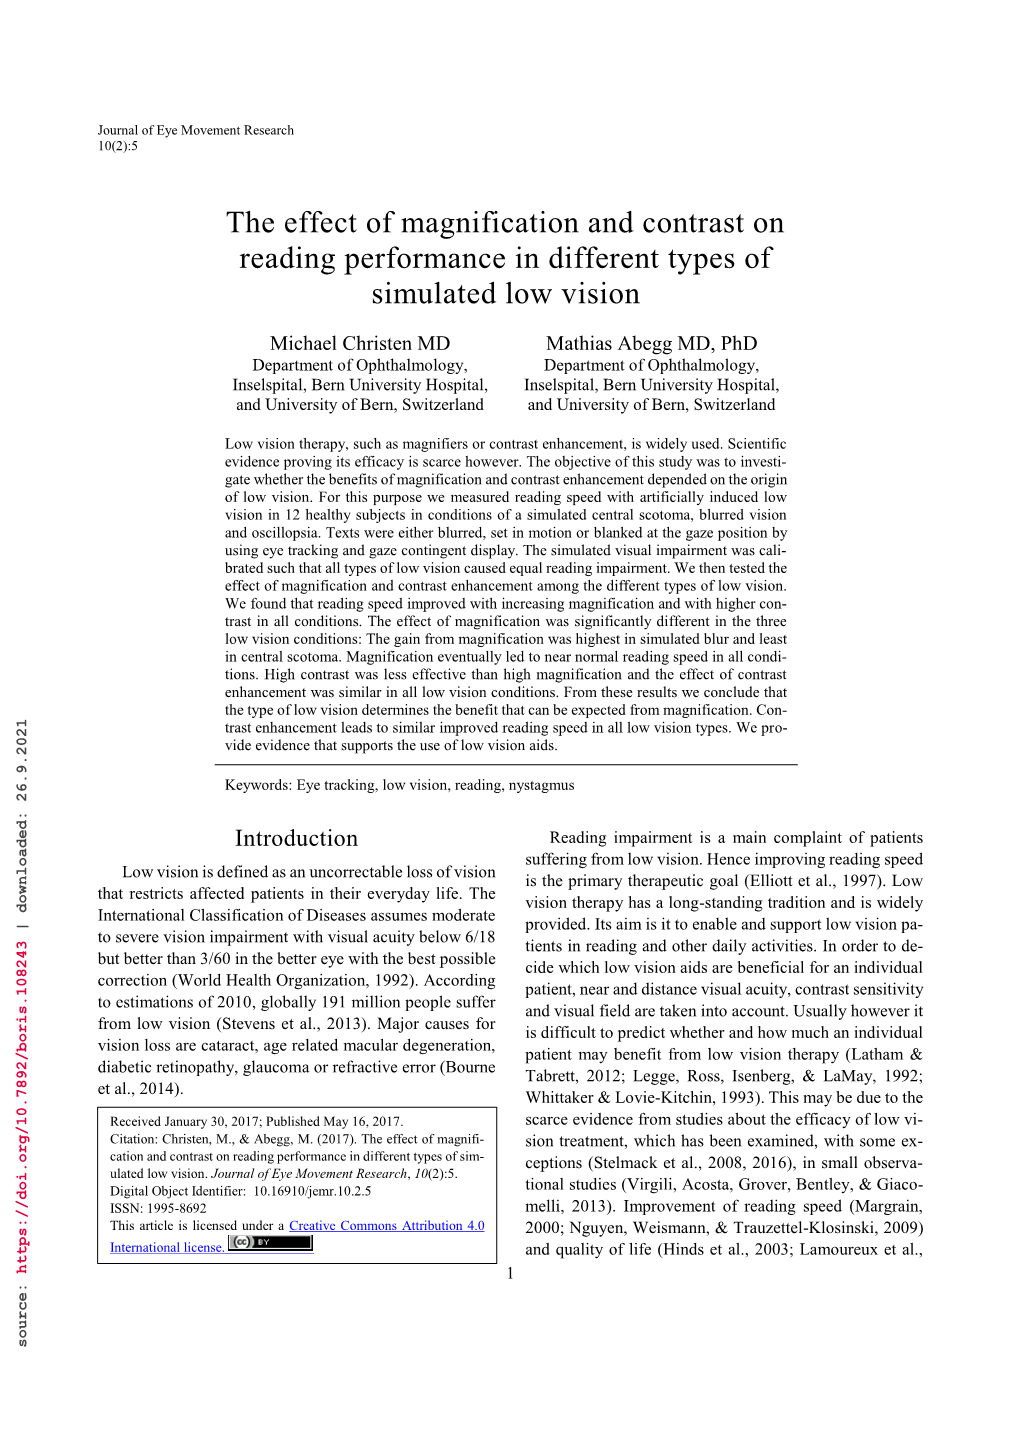 The Effect of Magnification and Contrast on Reading Performance